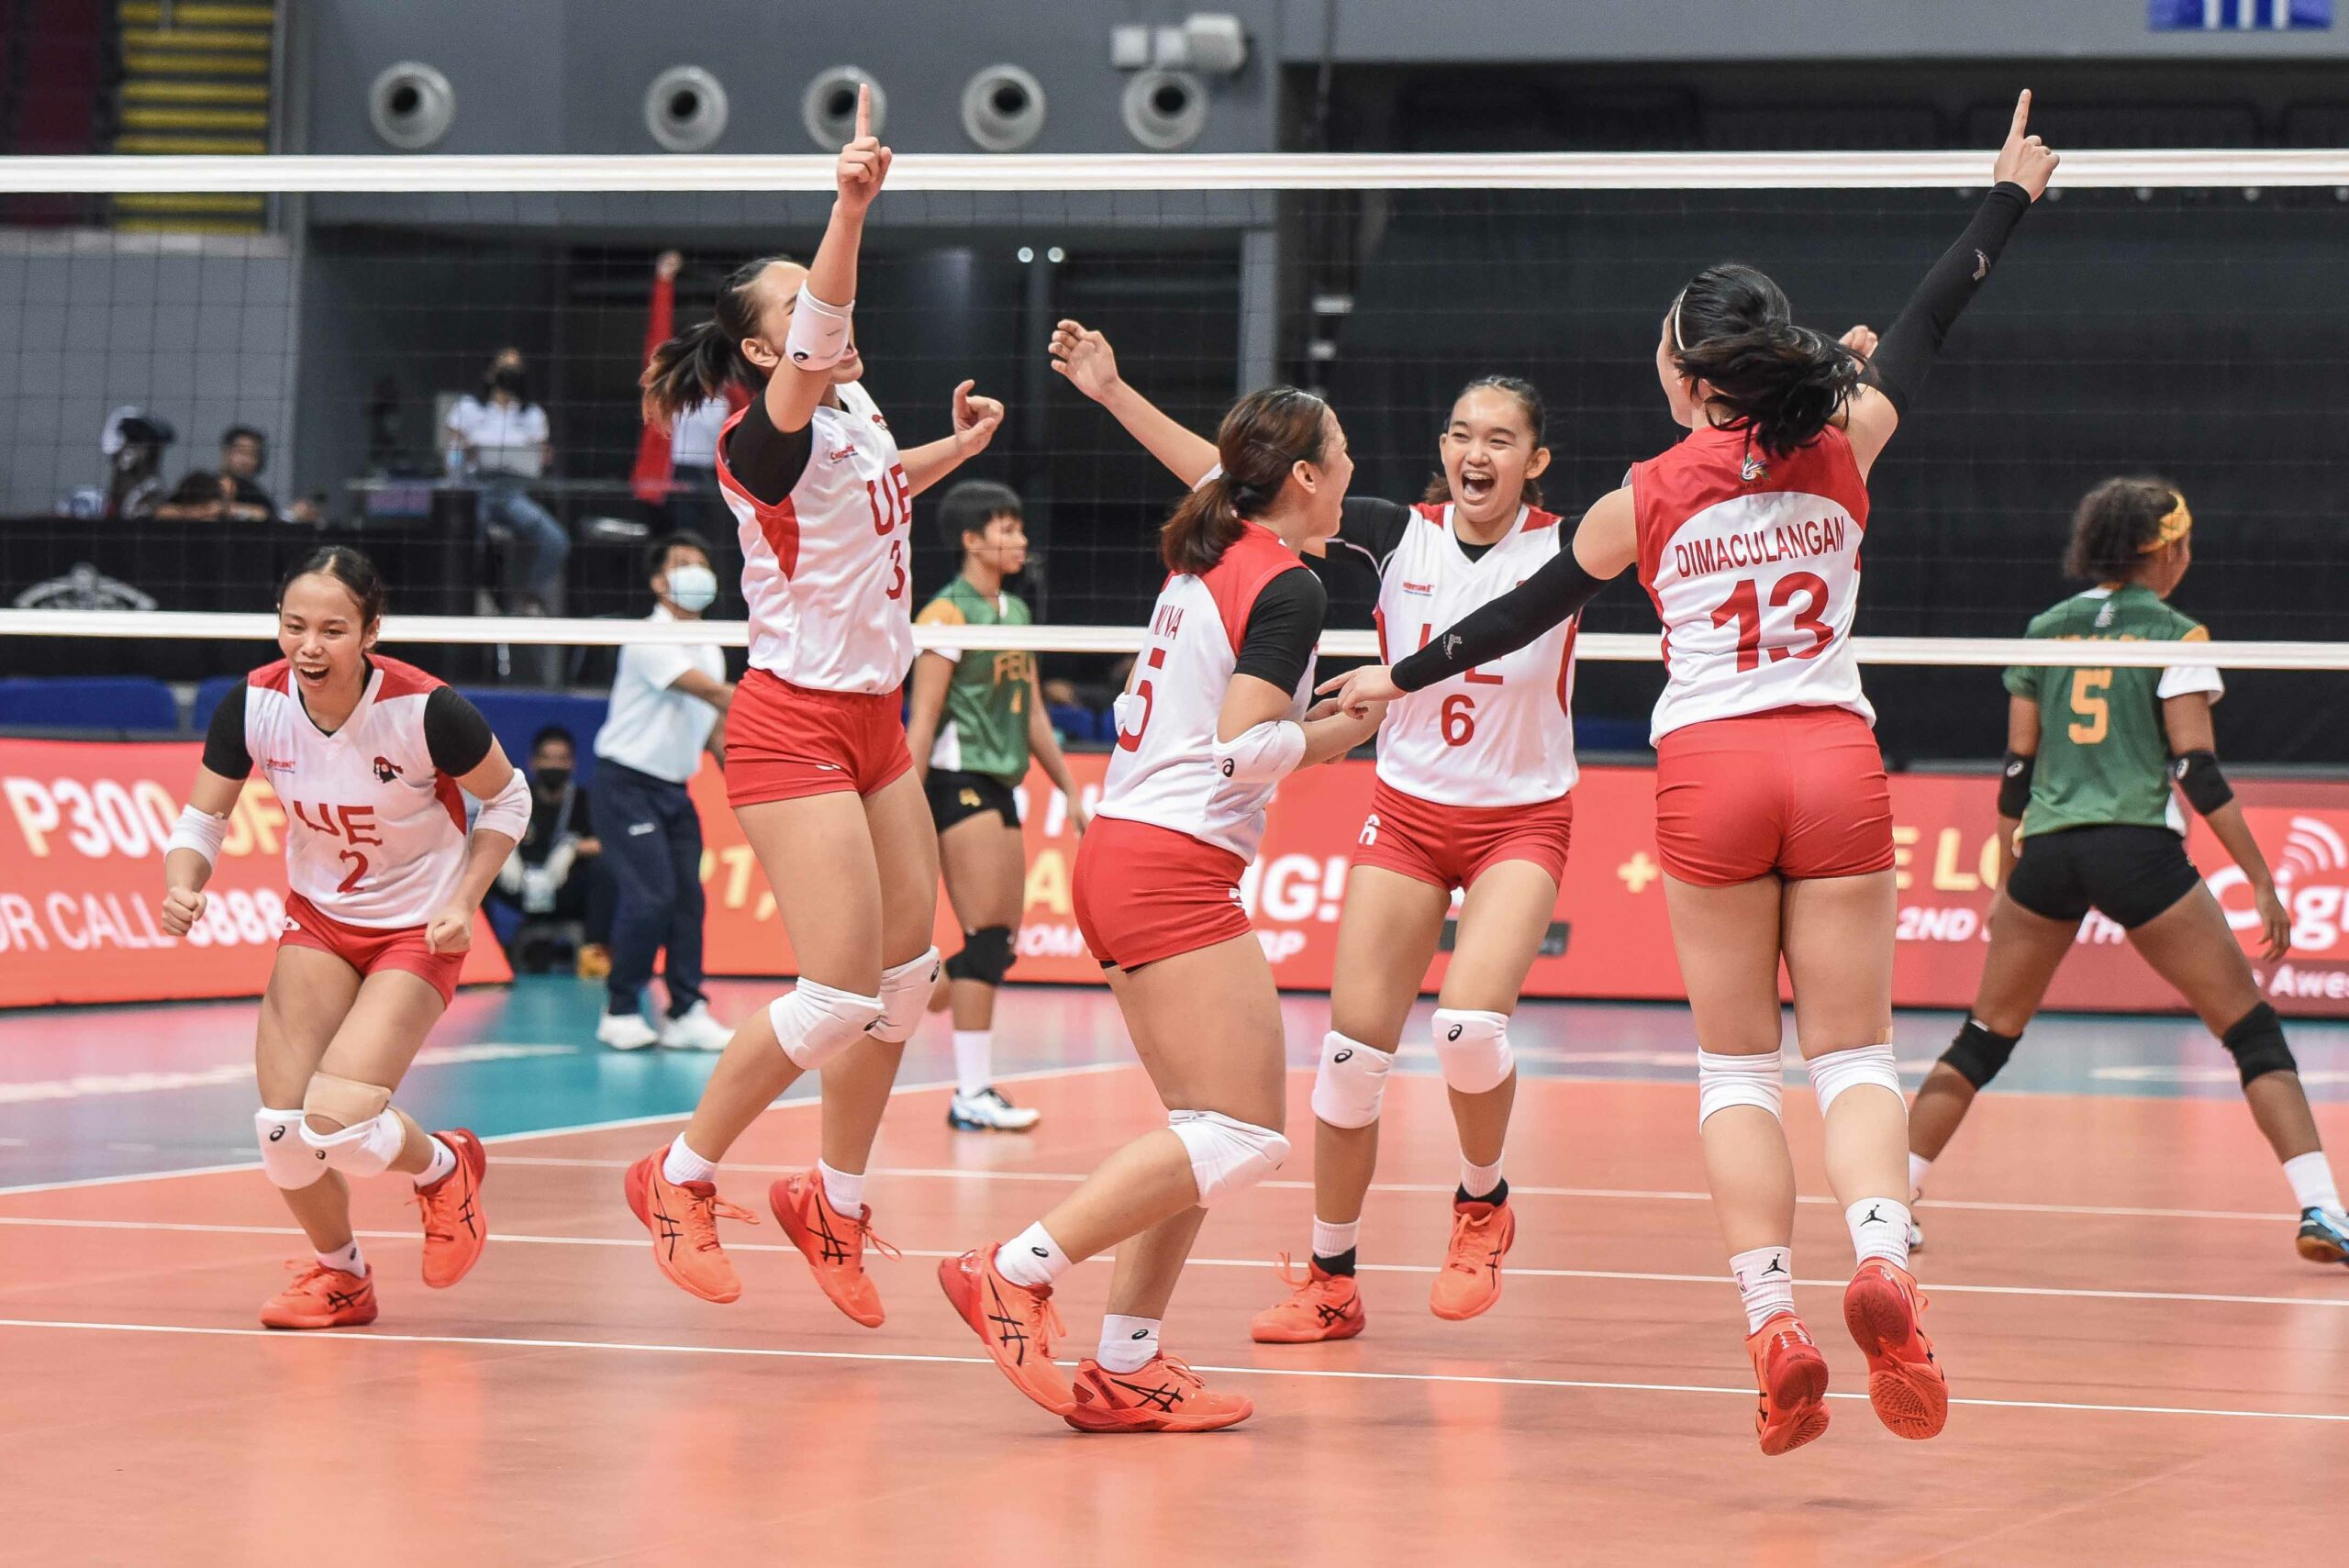 UAAP-Season-84-Womens-Volleyball-UE-vs-FEU-UE-3-scaled Tagaod, Fernandez want no part in another FEU loss to UE FEU News UAAP Volleyball  - philippine sports news